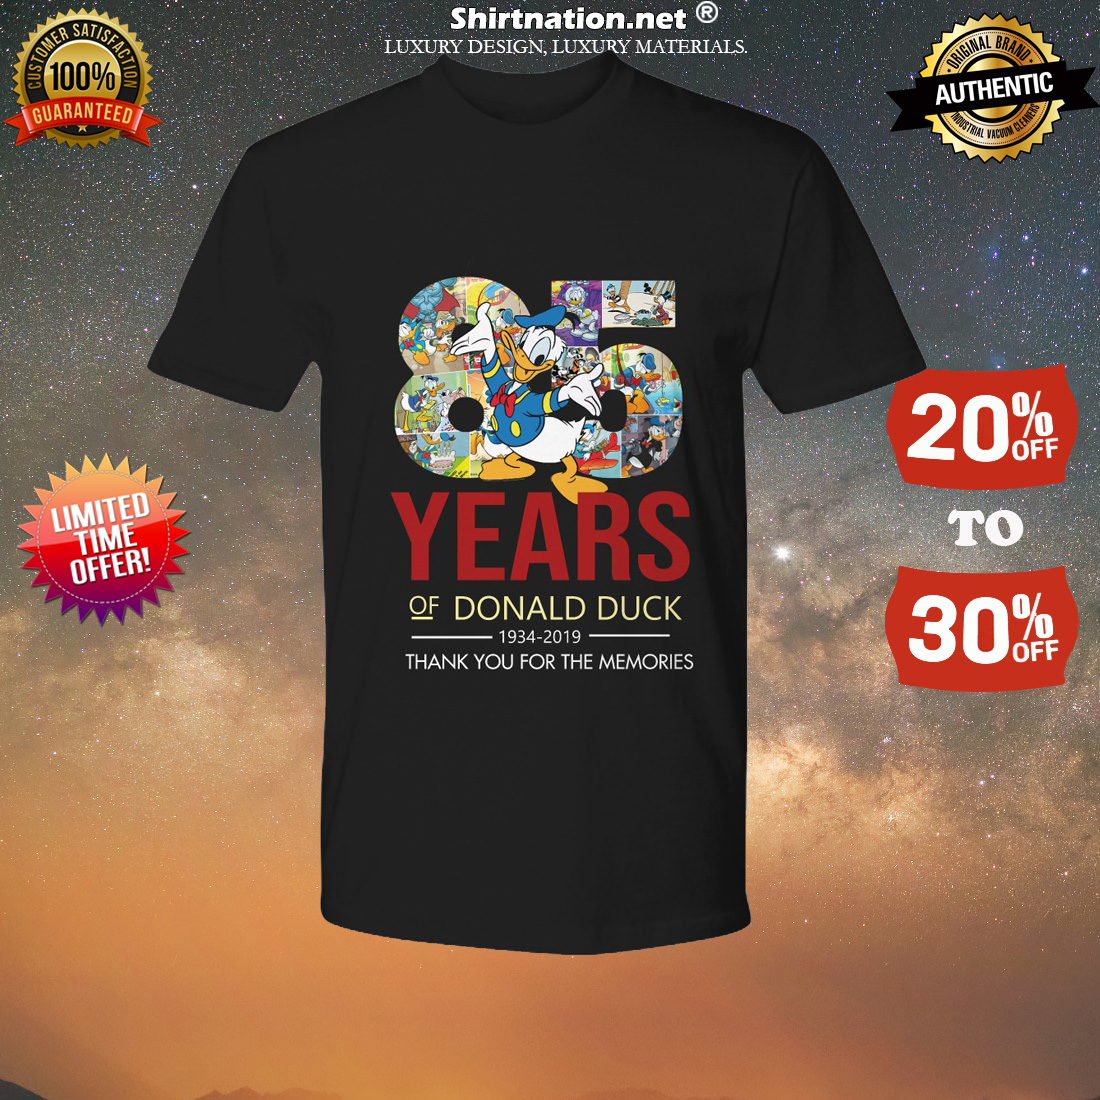 85 years of Donald duck thank you for the memories premium tee shirt